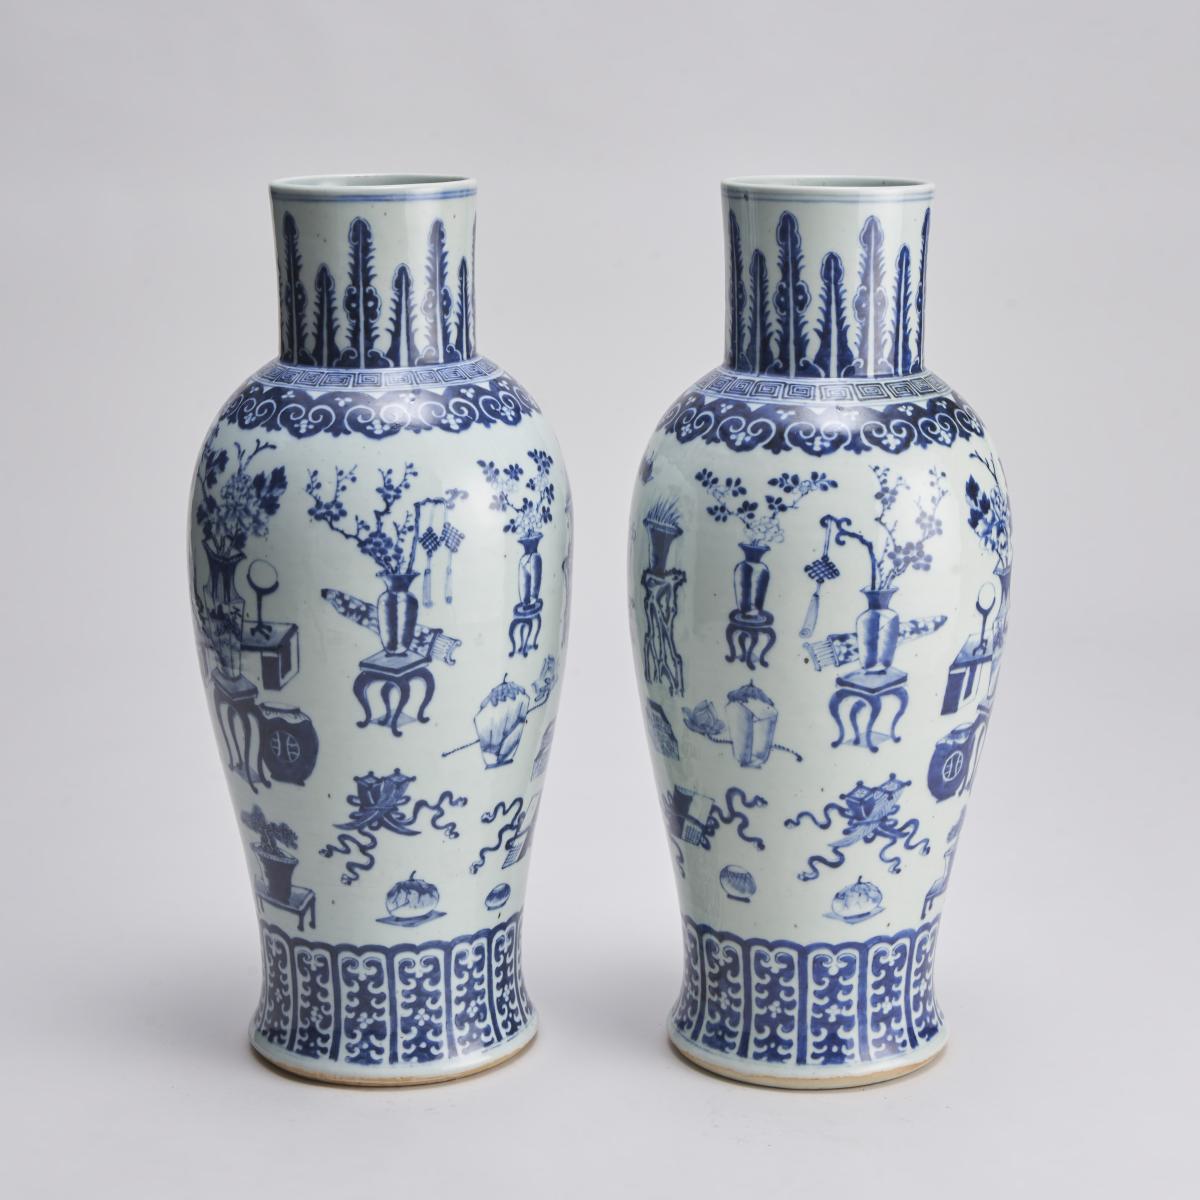 An imposing (59cm in height) pair of Nineteenth Century baluster-form blue and white vases